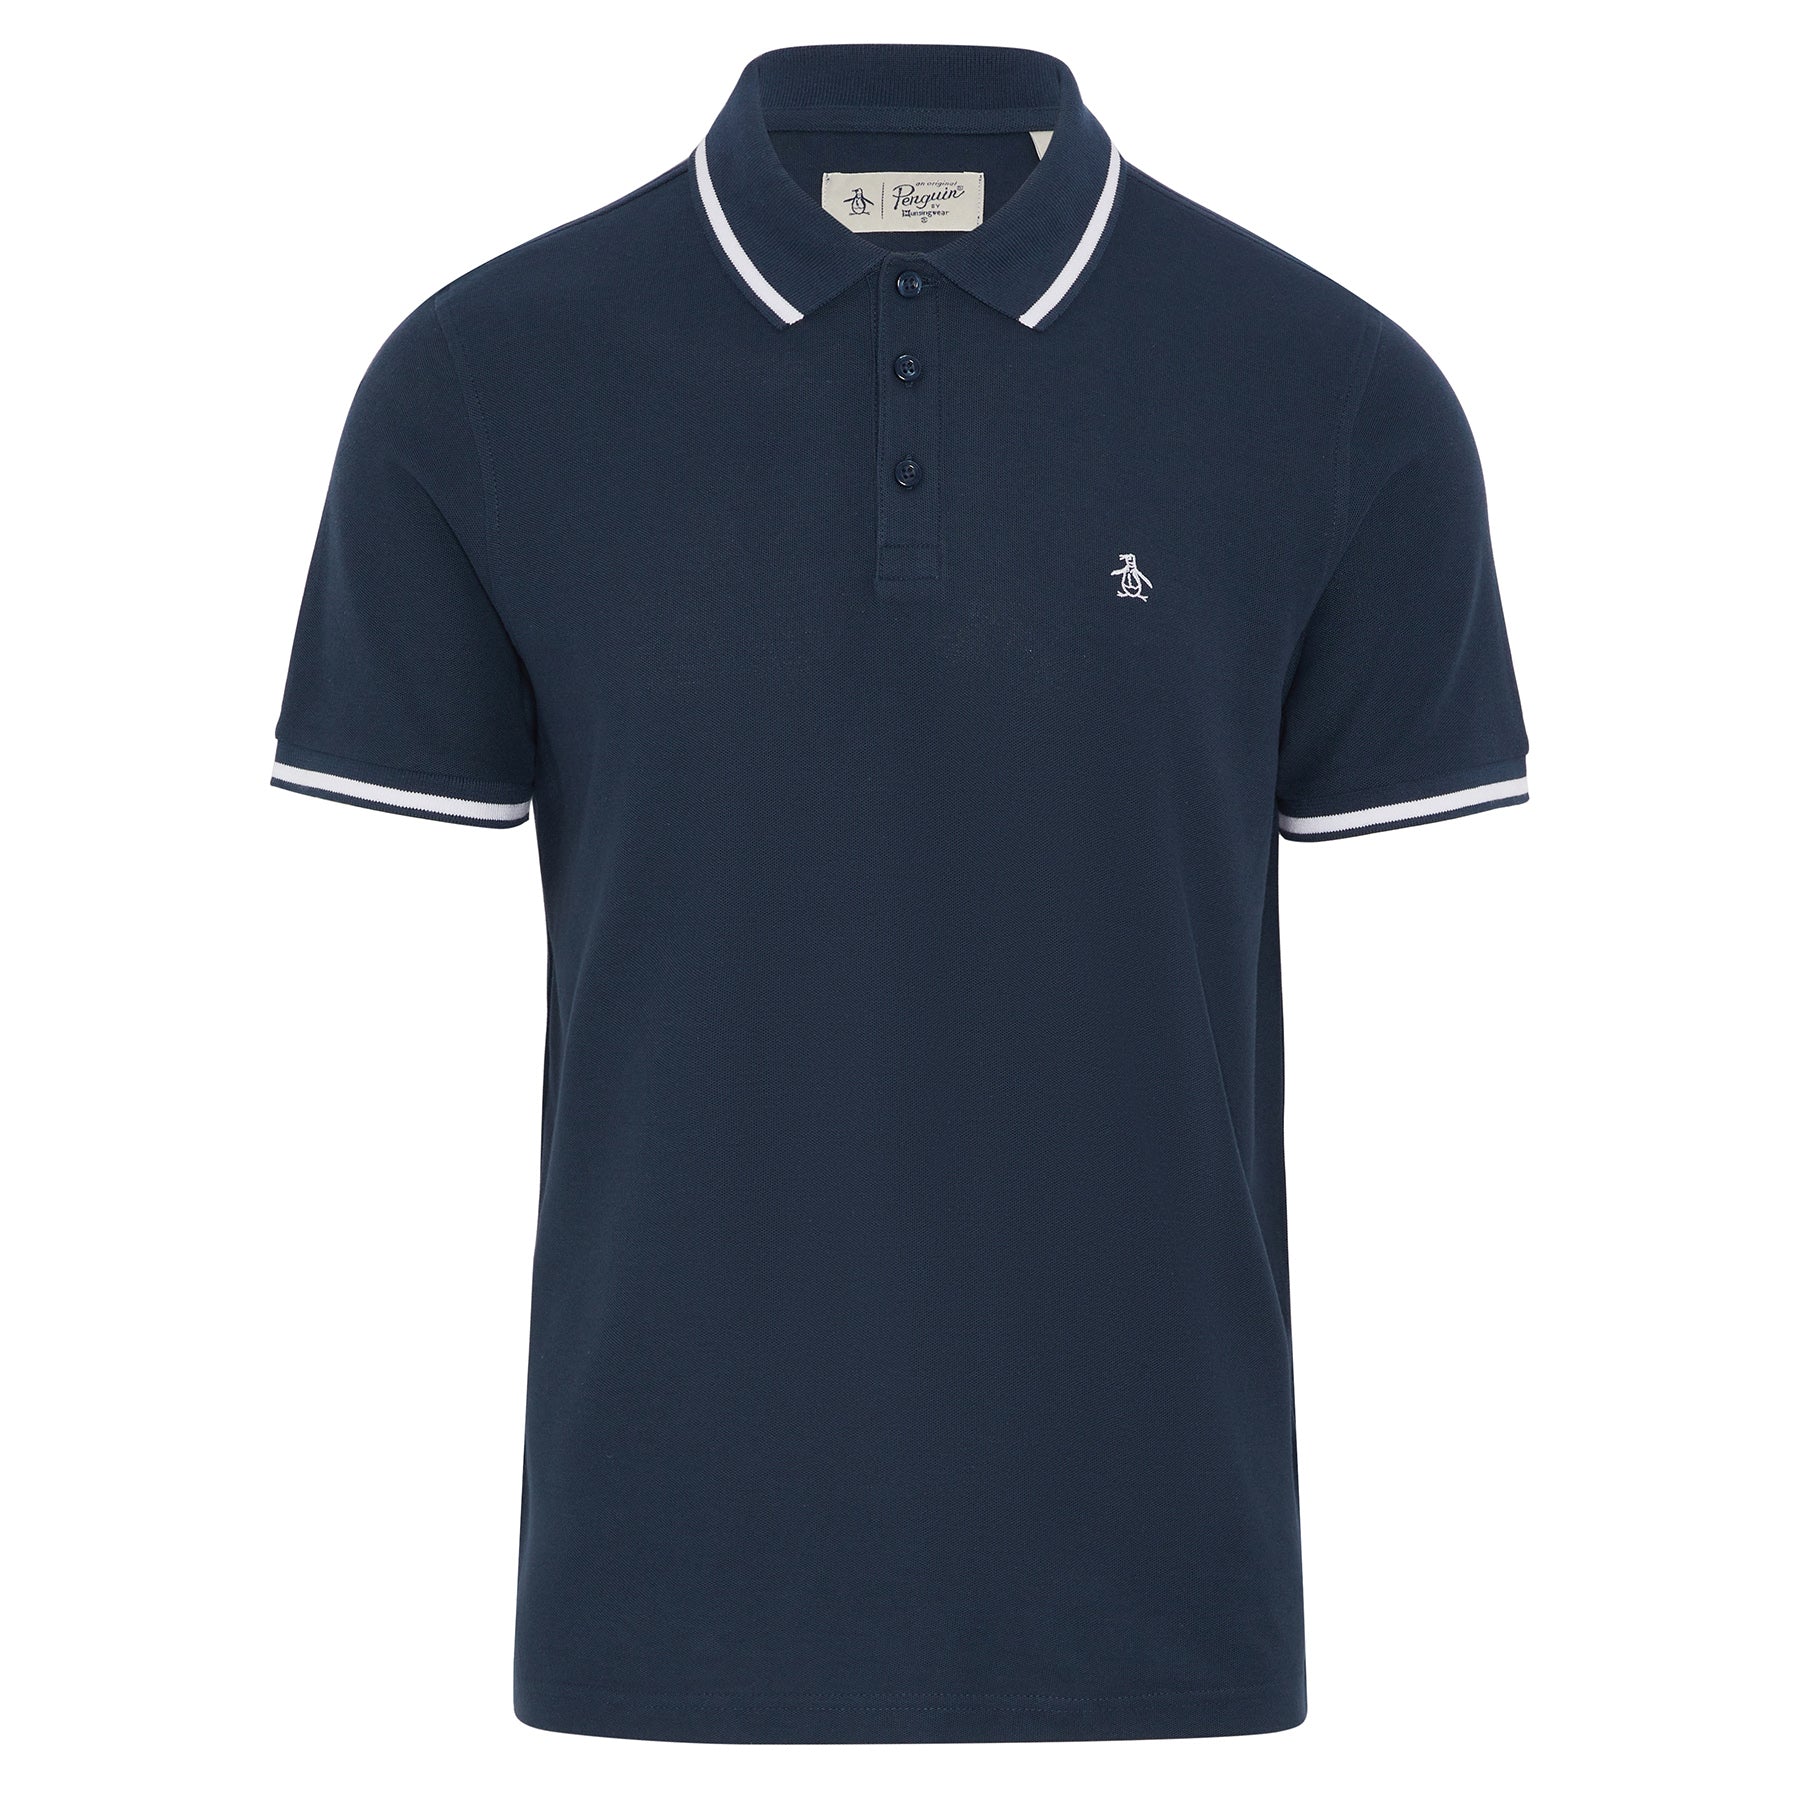 View Short Sleeve Polo Shirt With Contrast Tipping In Yale information